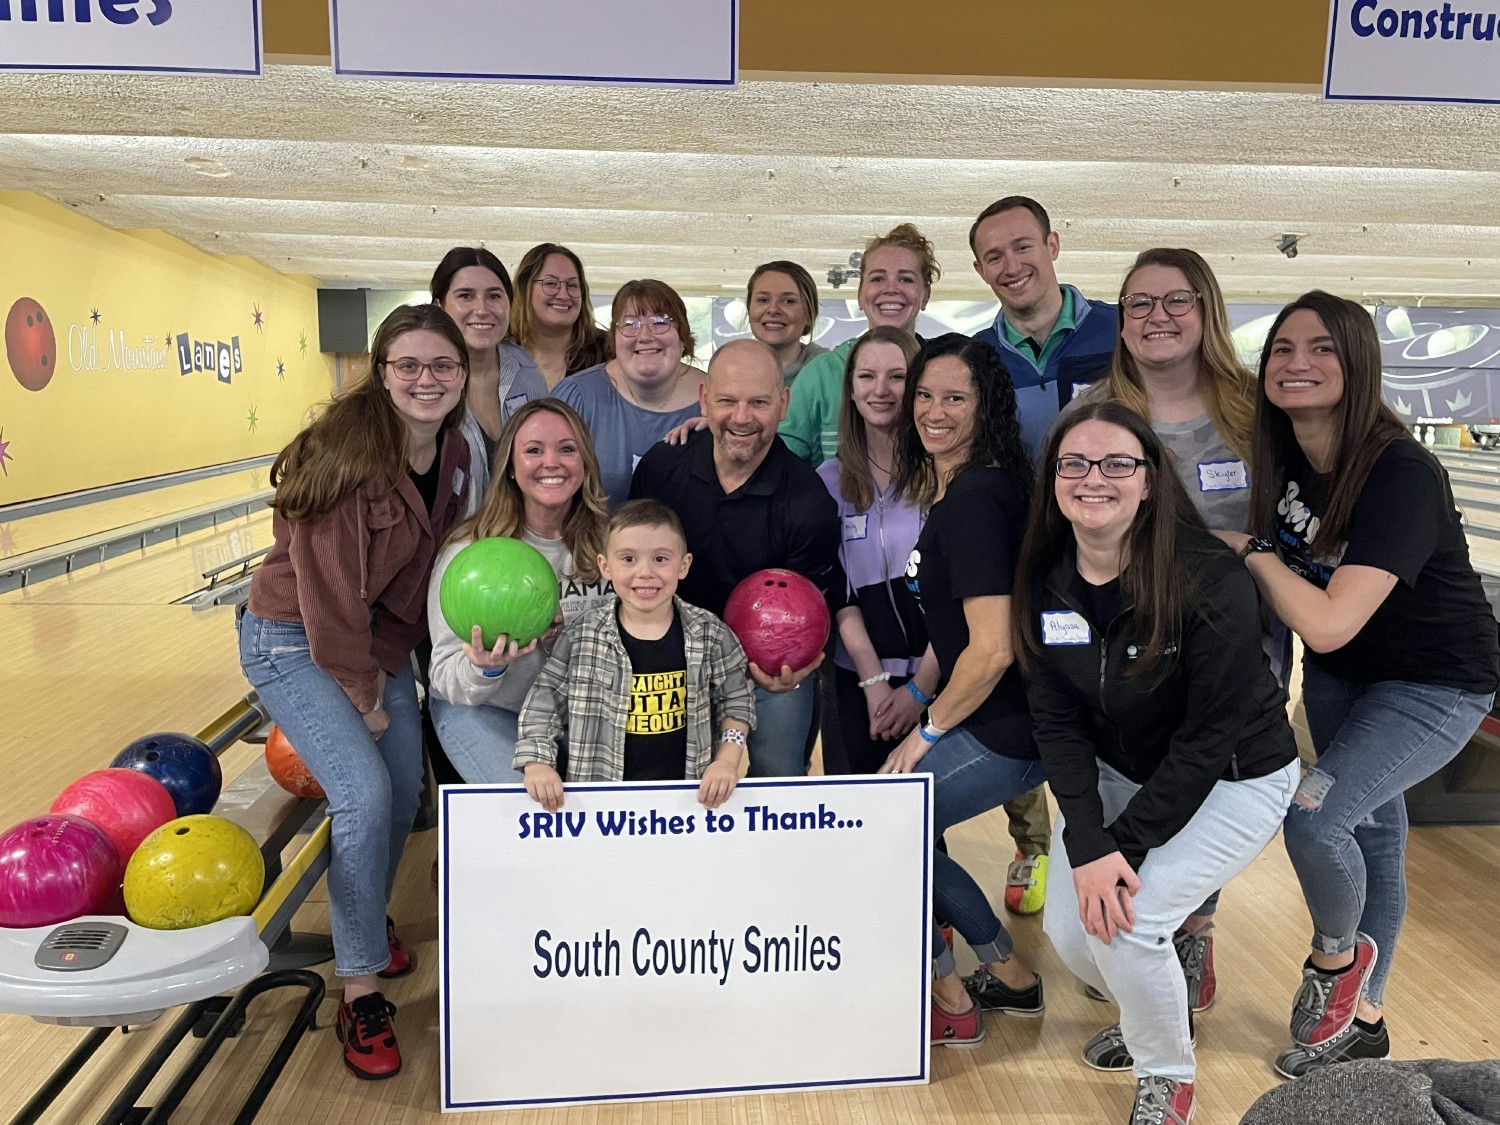 Team Smiles participates in the Southern RI Volunteers annual Bowled Over, a fundraising event for local seniors in need